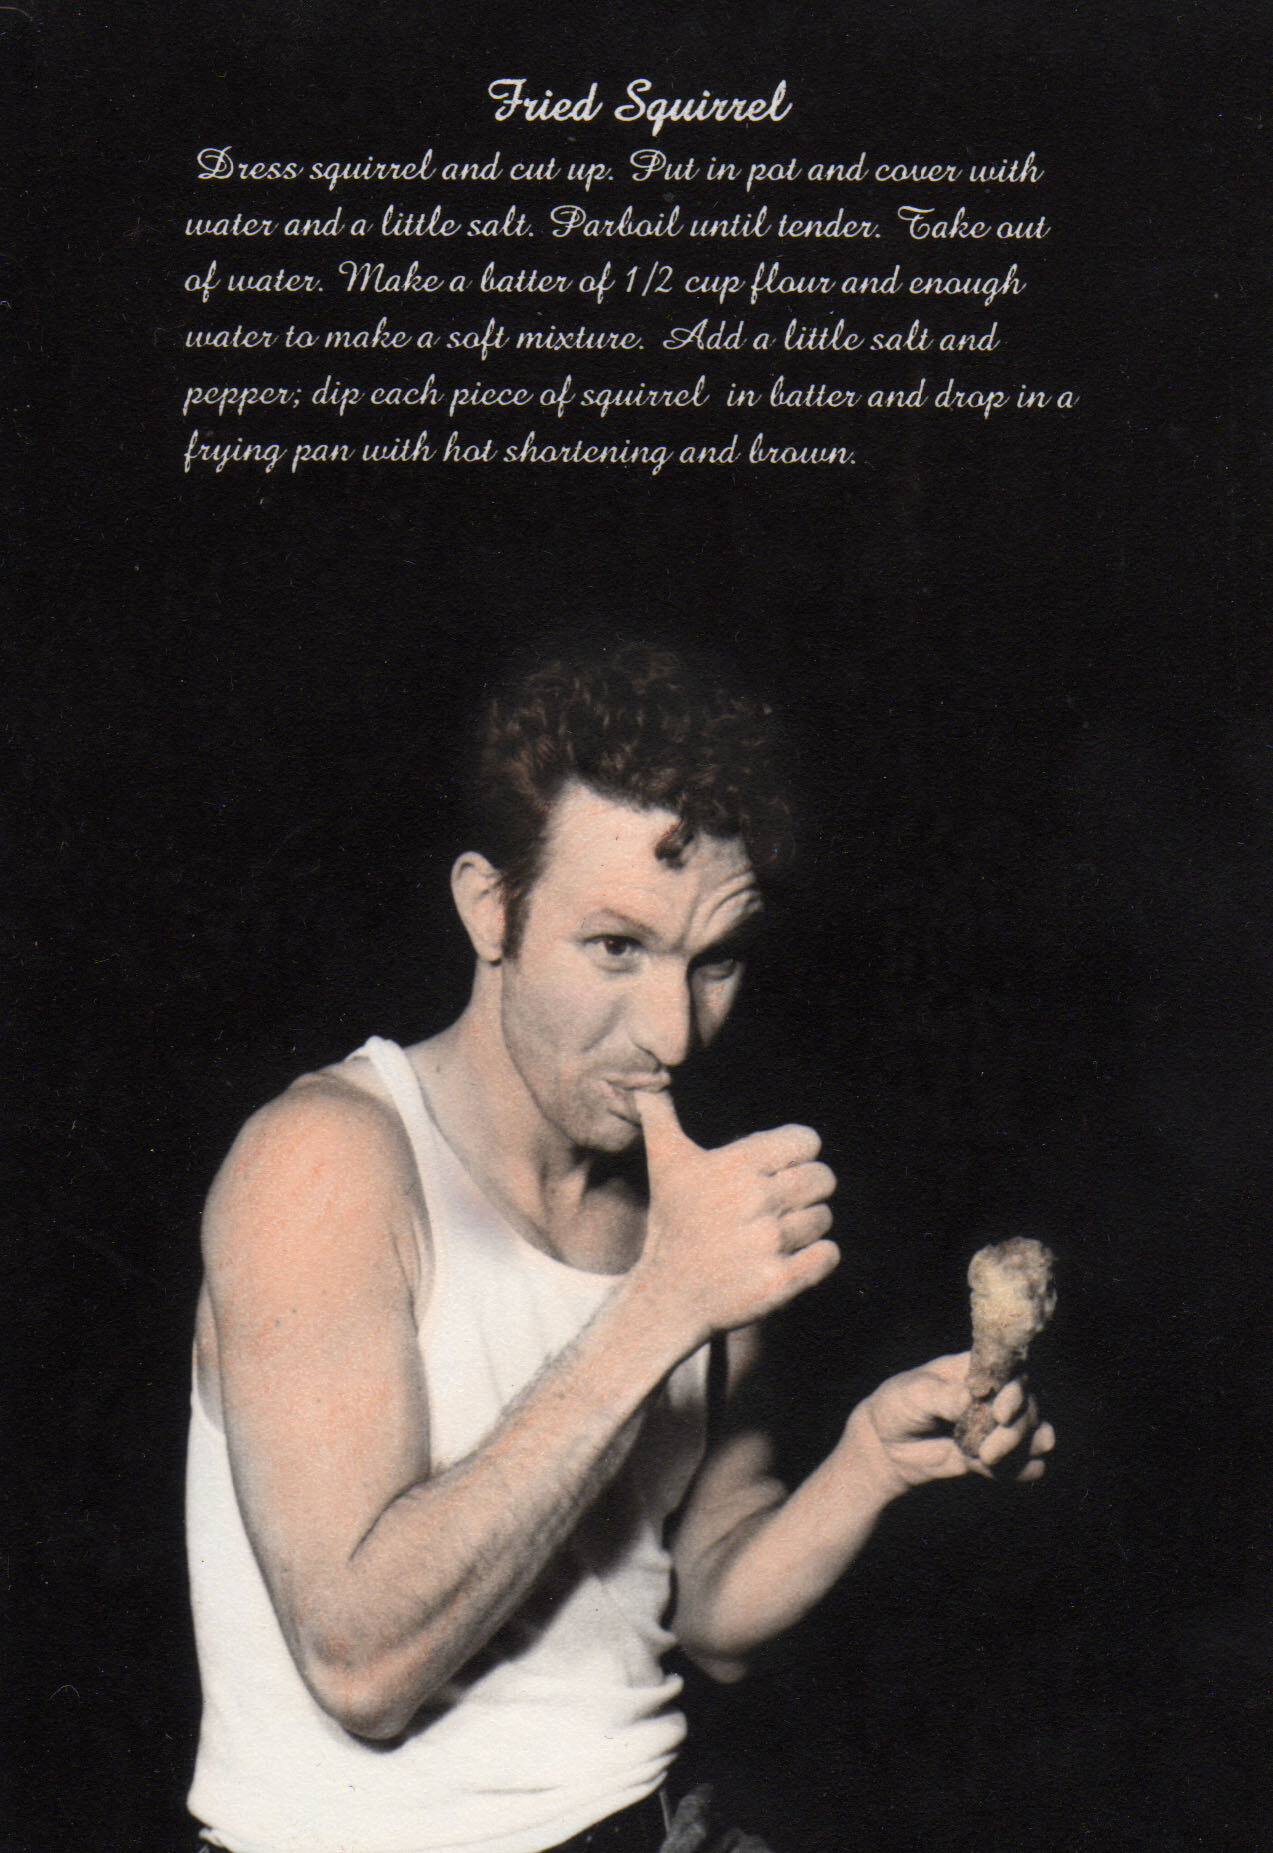  Bobby enjoying some fried squirrel in a hand-colored silver gelatin print from 1999. 